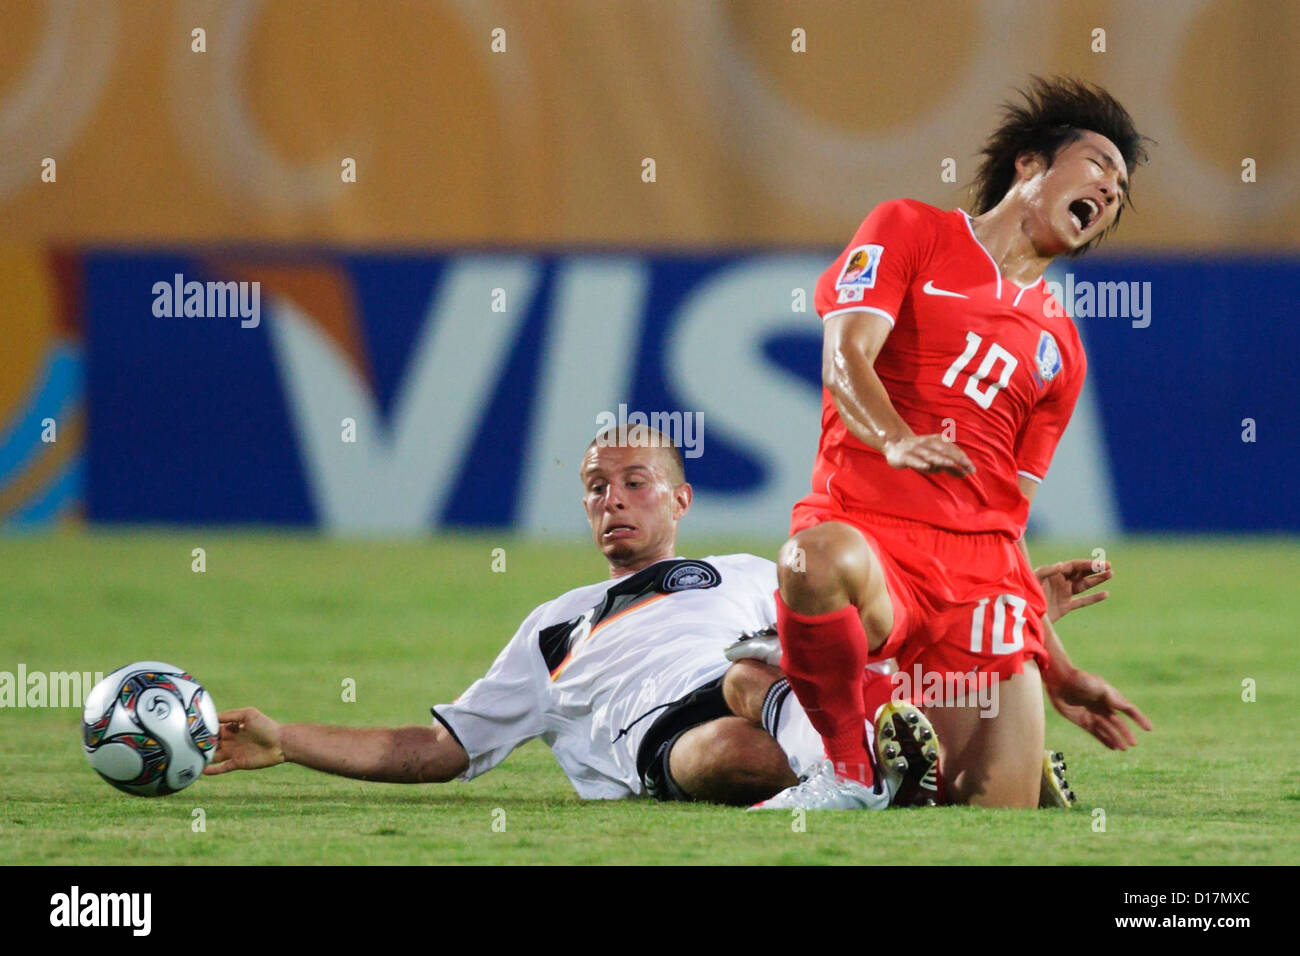 David Vrzogic of Germany (L) tackles Young Cheol Cho of South Korea (R) during a 2009 FIFA U-20 World Cup Group C match. Stock Photo